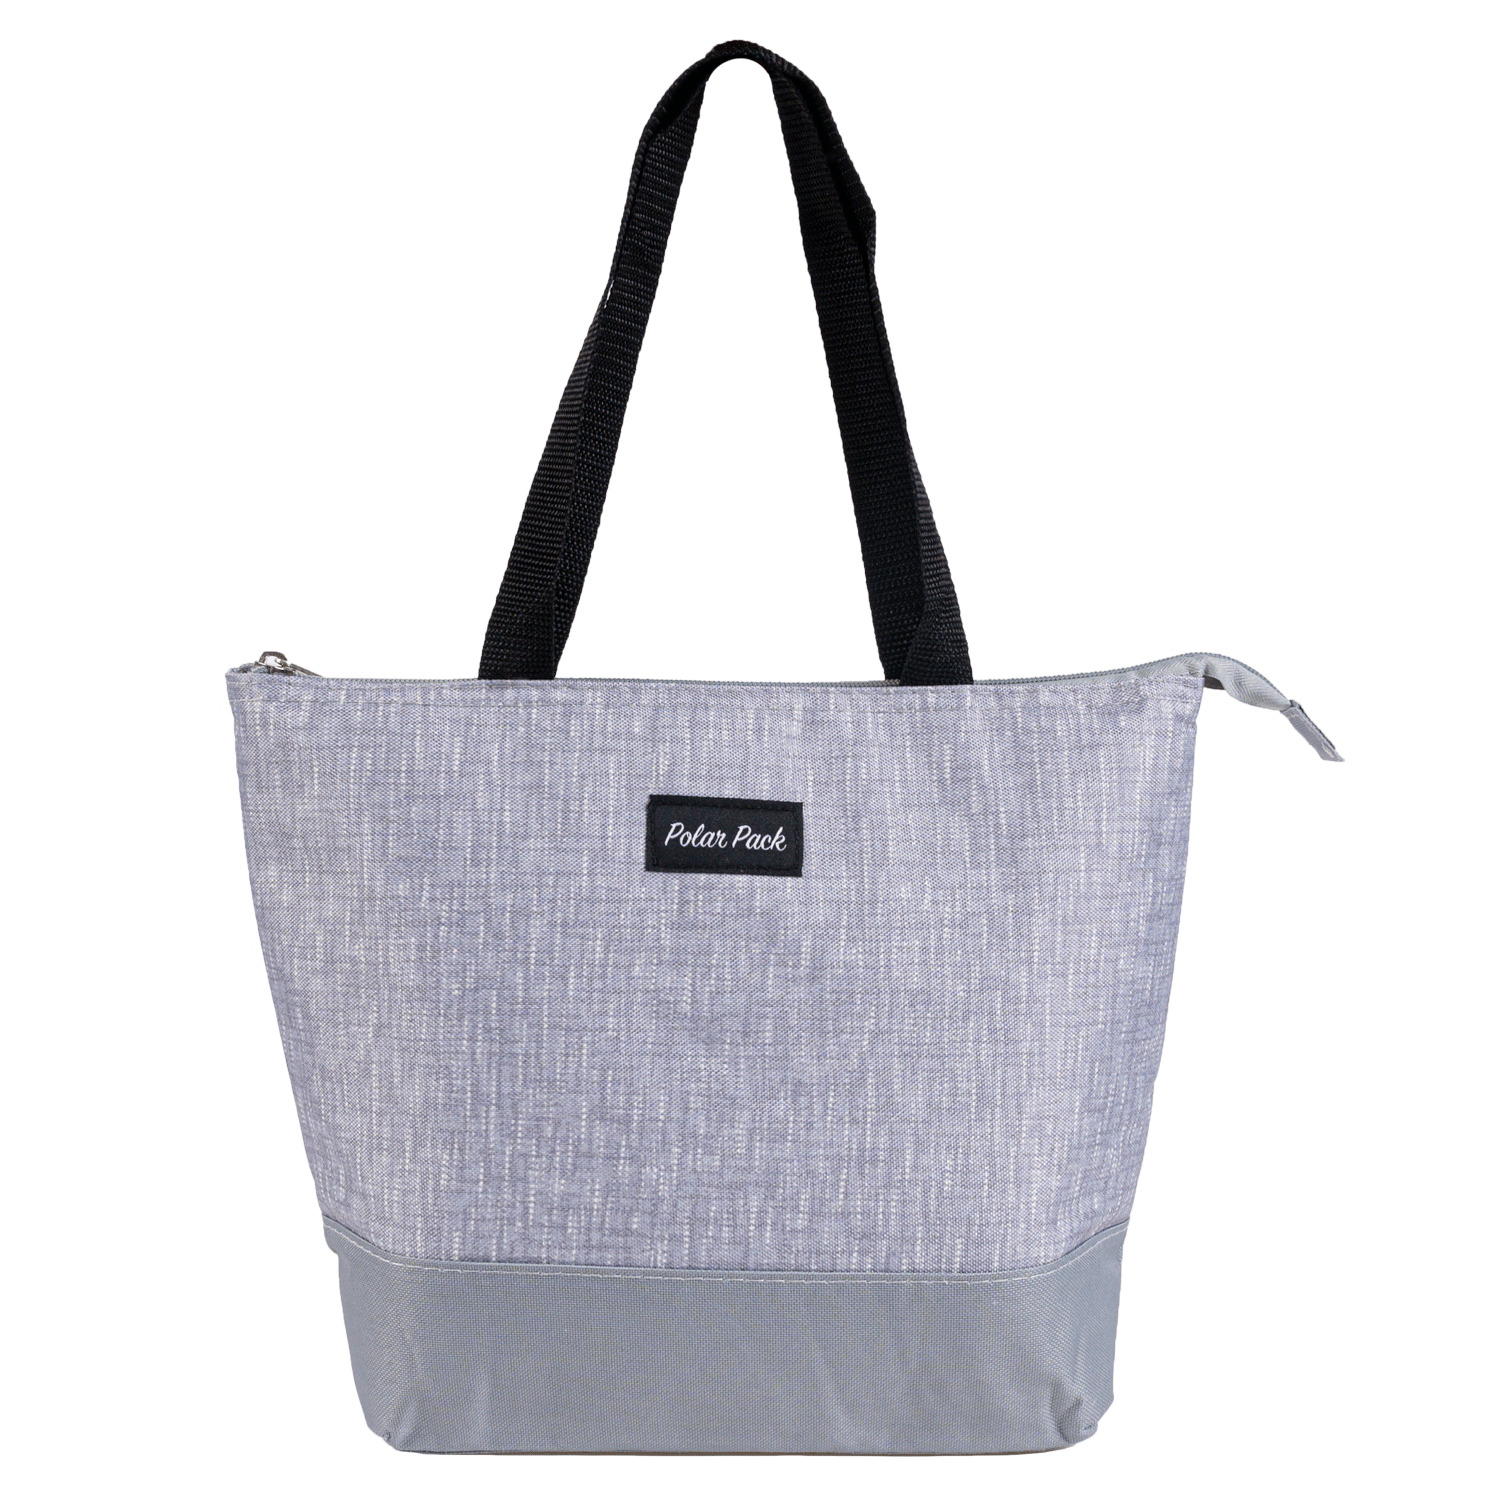 Polar Pack - Insulated cooler tote bag - Grey. Colour: grey